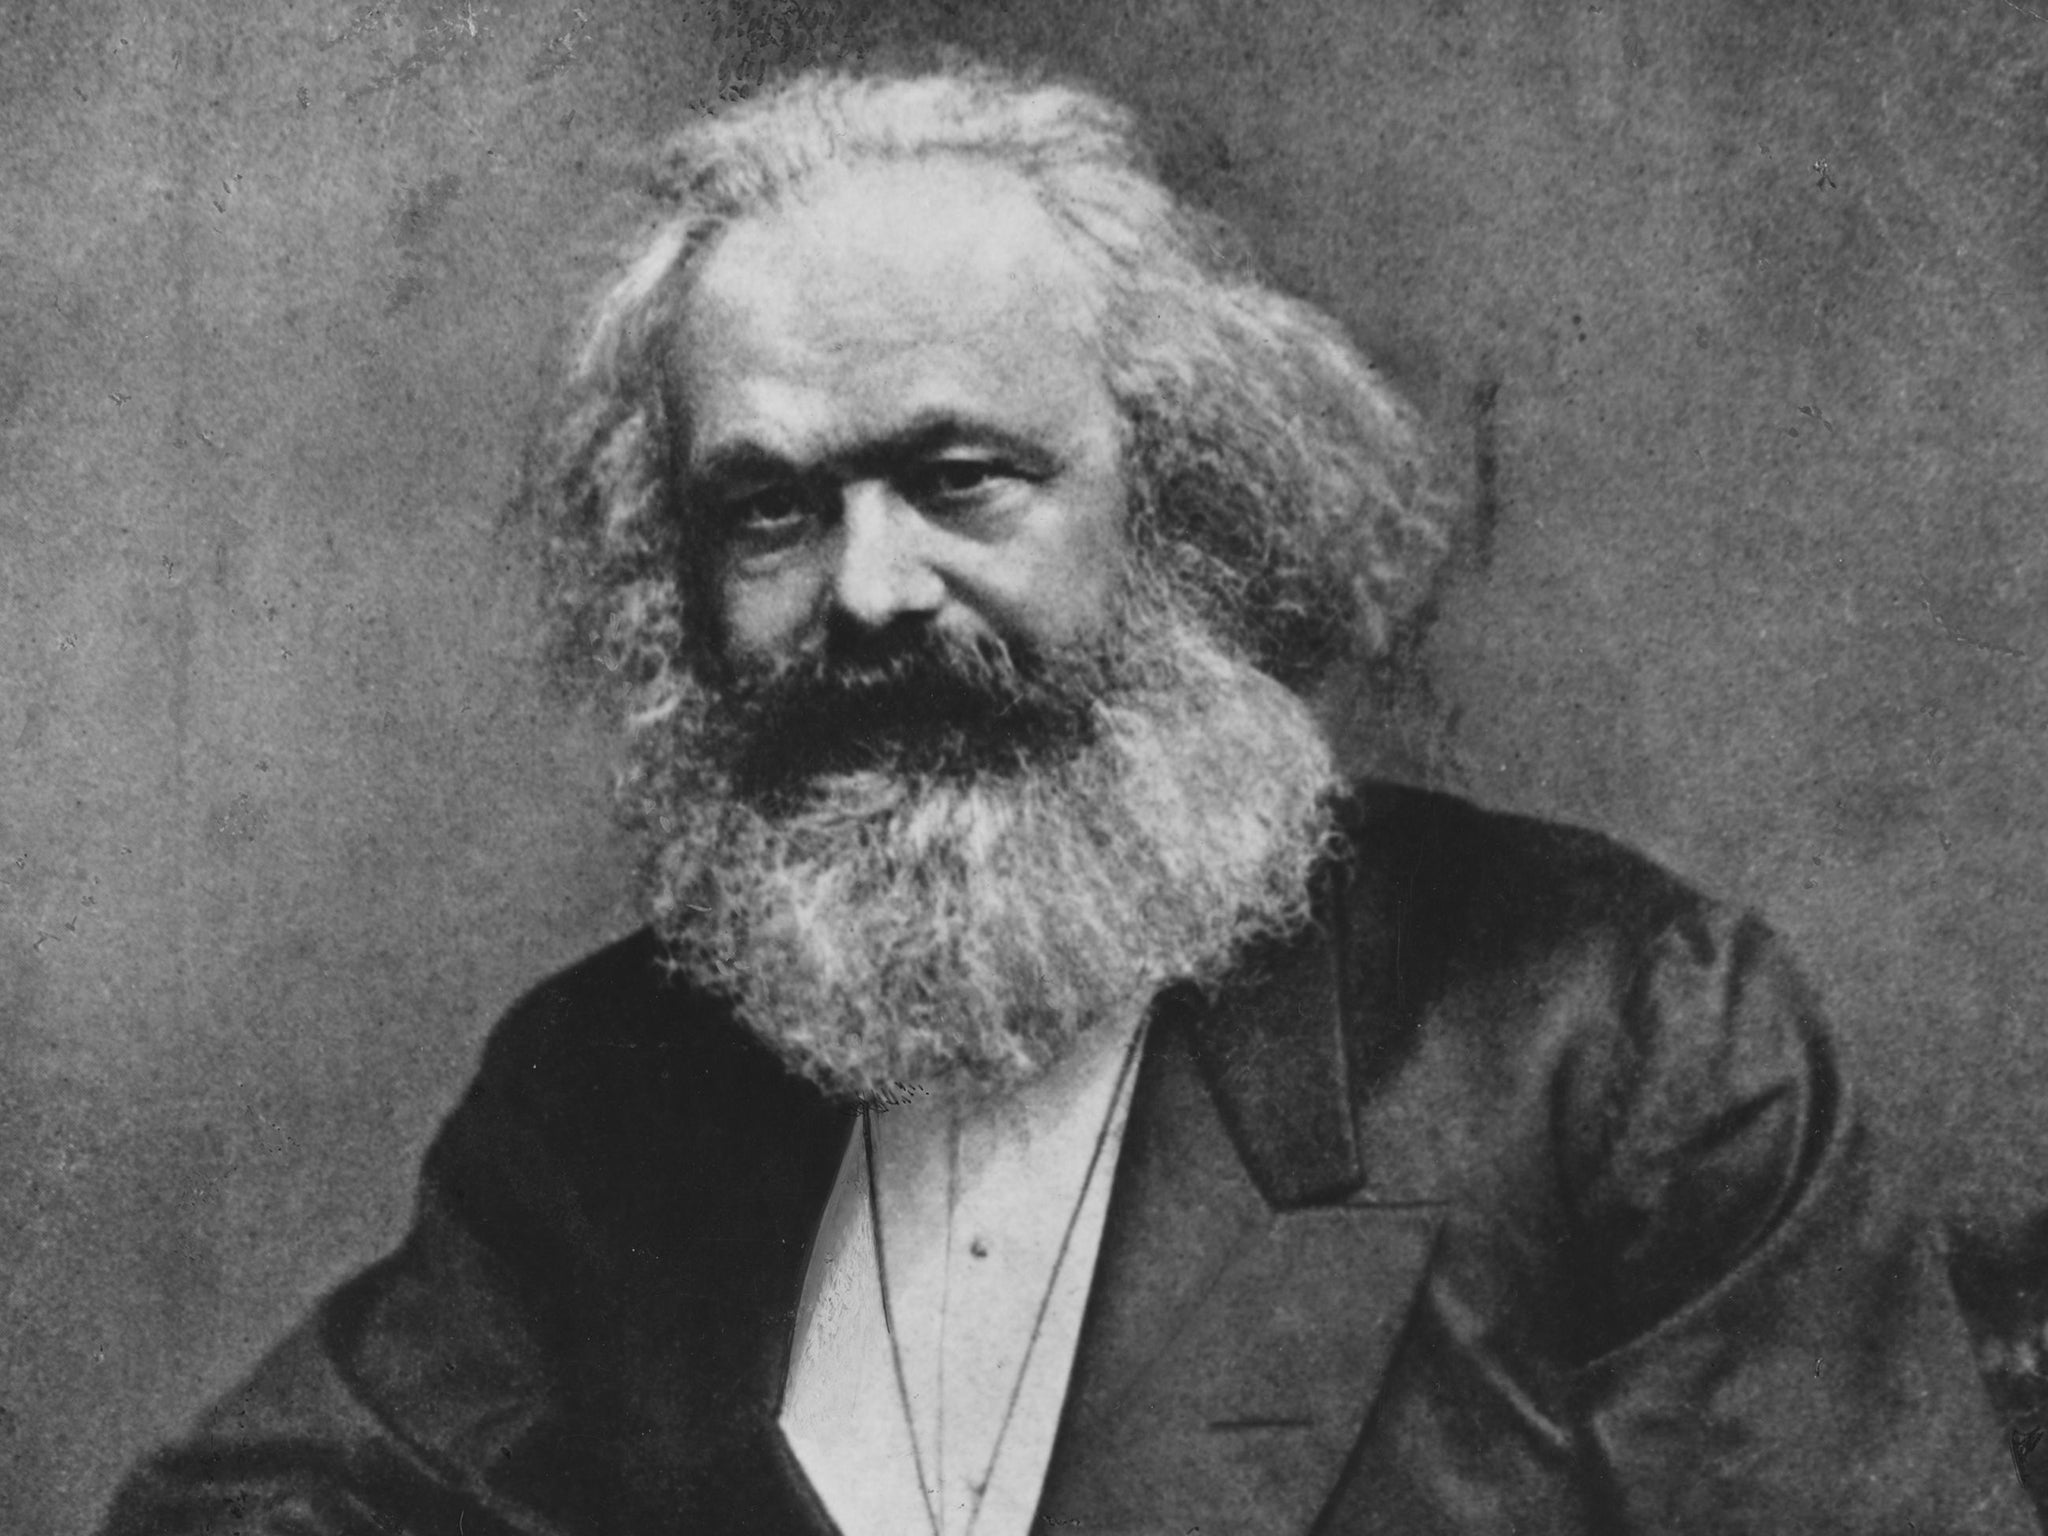 ‘The Communist Manifesto’ by Marx (pictured) and Engels was published on 21 February 1848